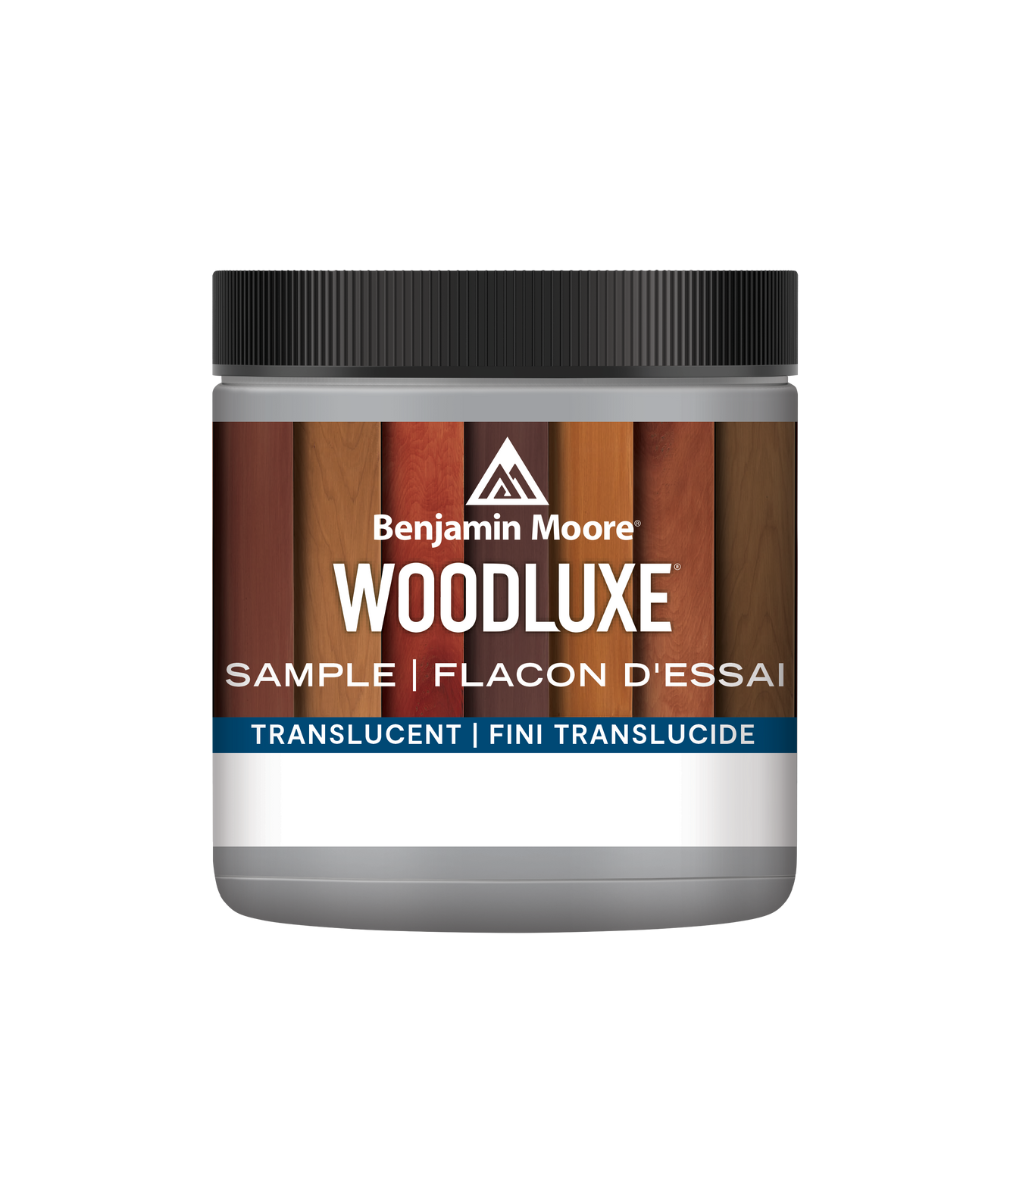 Woodluxe® Water-Based Translucent